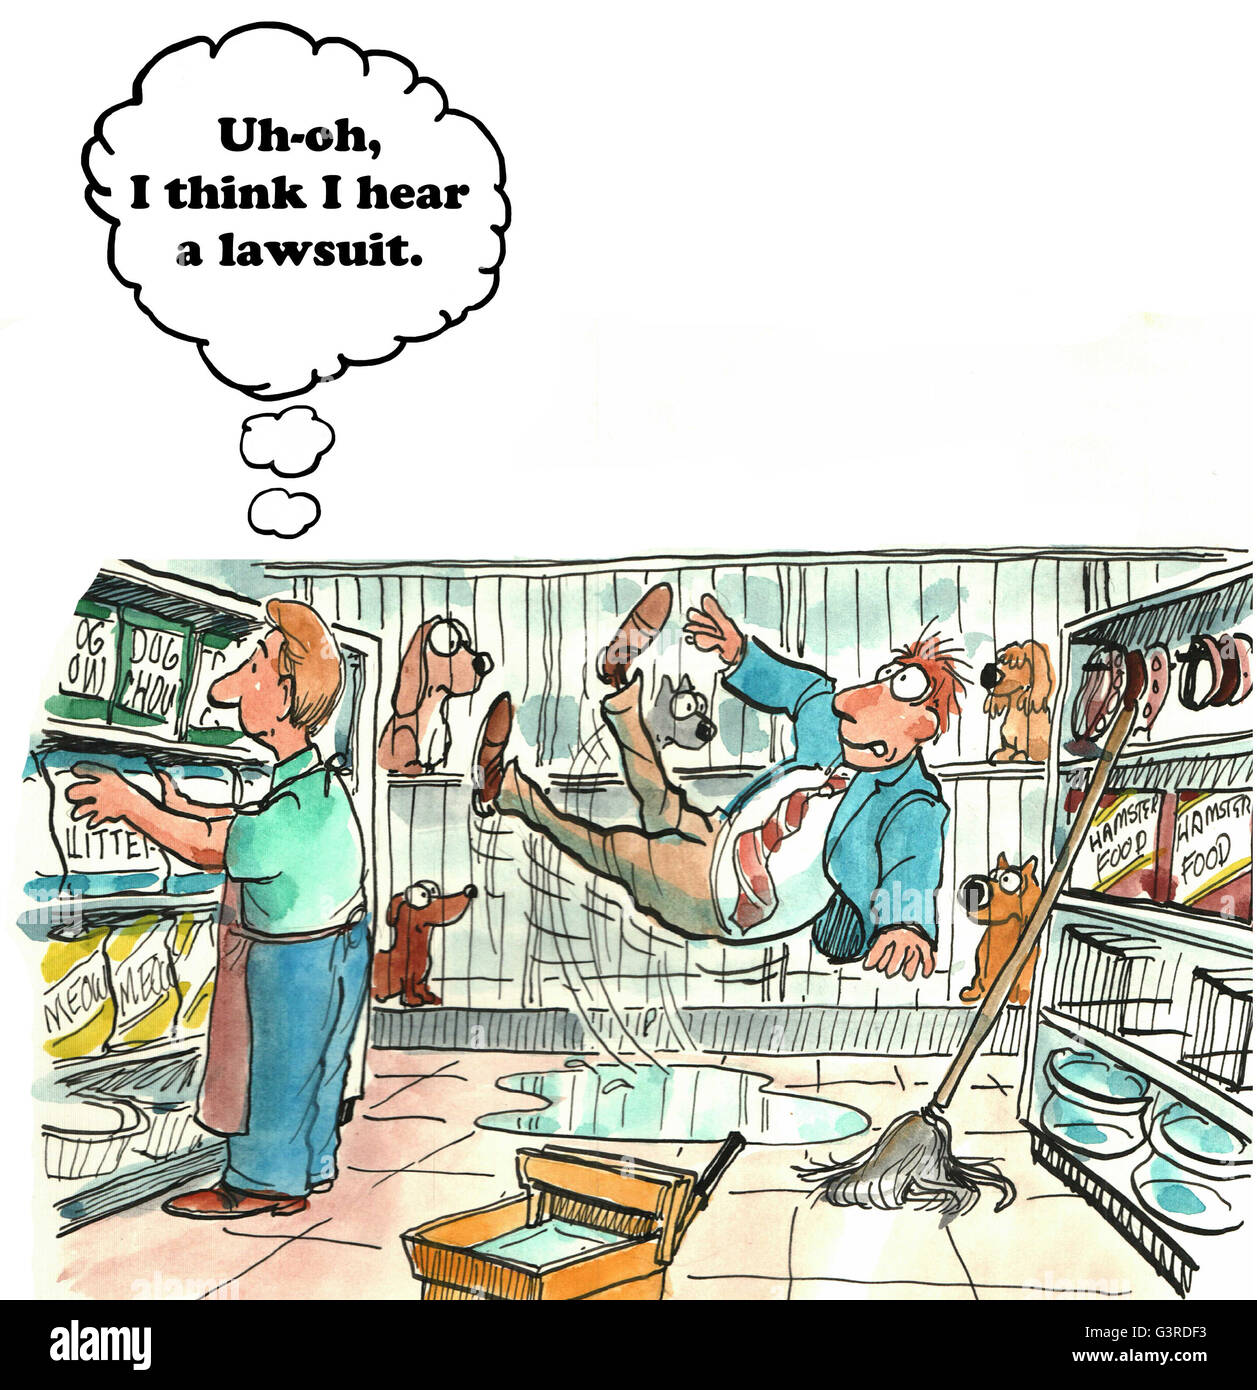 Legal cartoon about a customer who falls and sues the store. Stock Photo